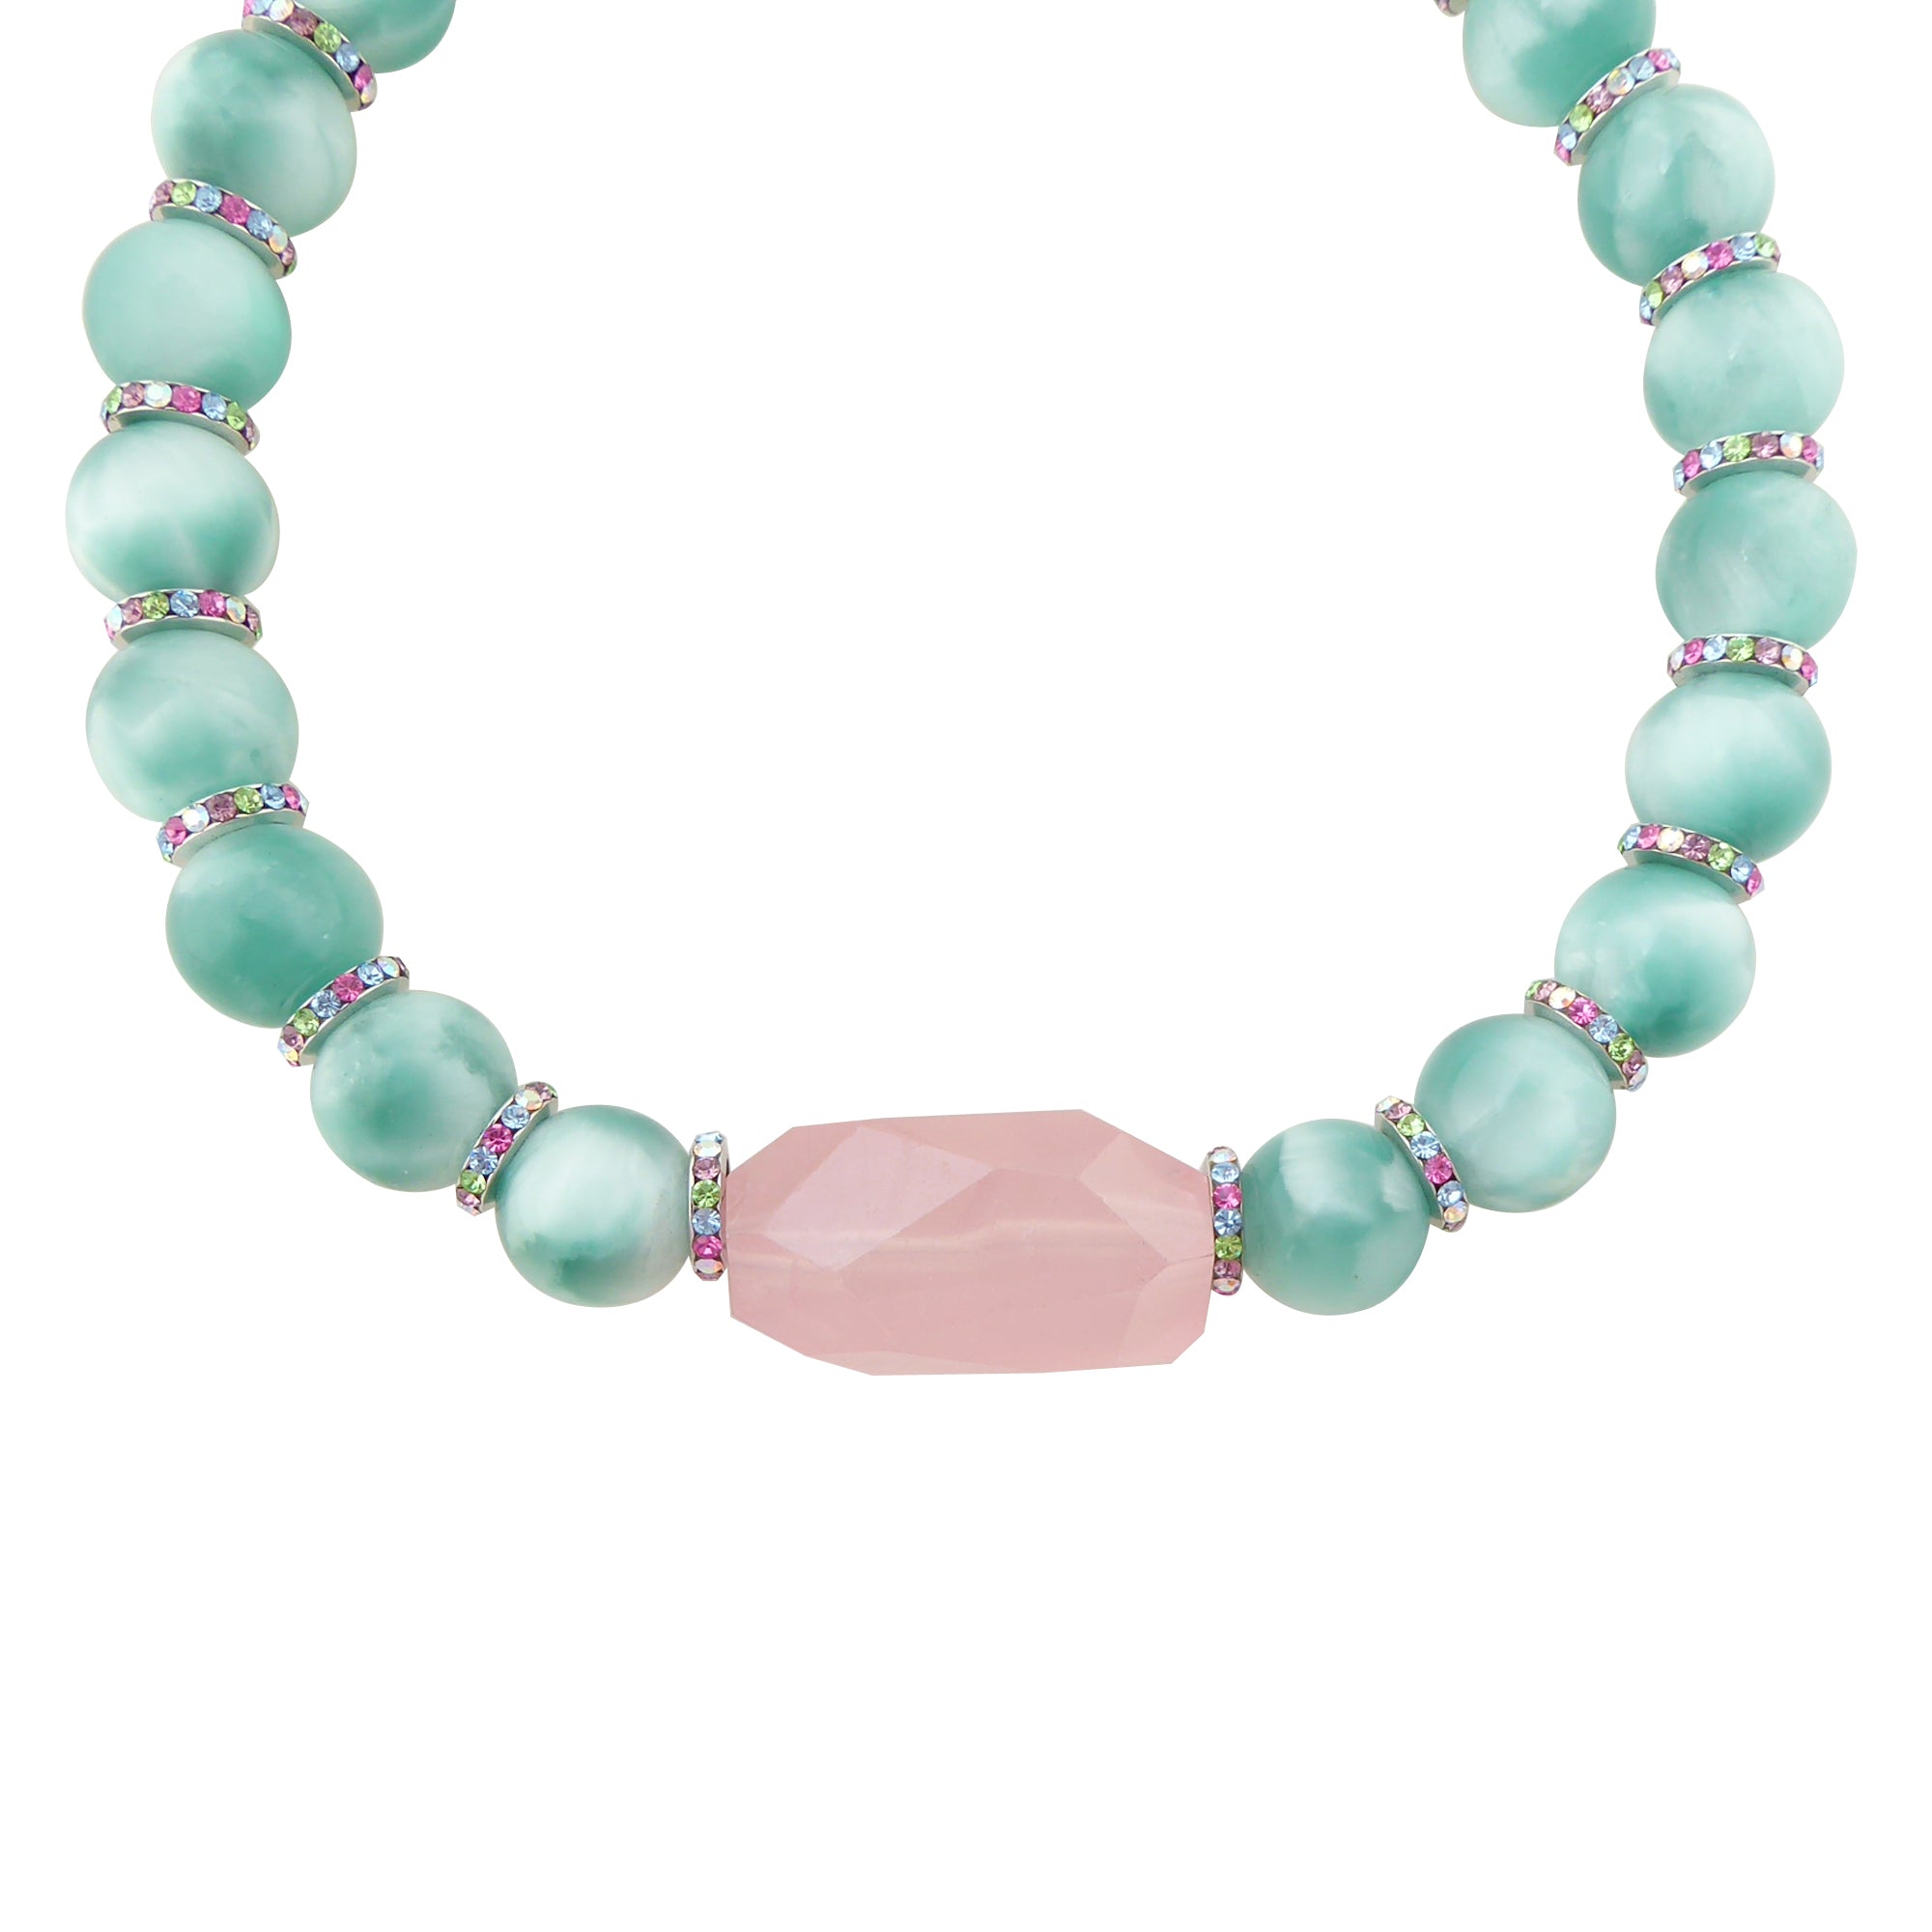 Green moonstone and rose quartz necklace by Jenny Dayco 1